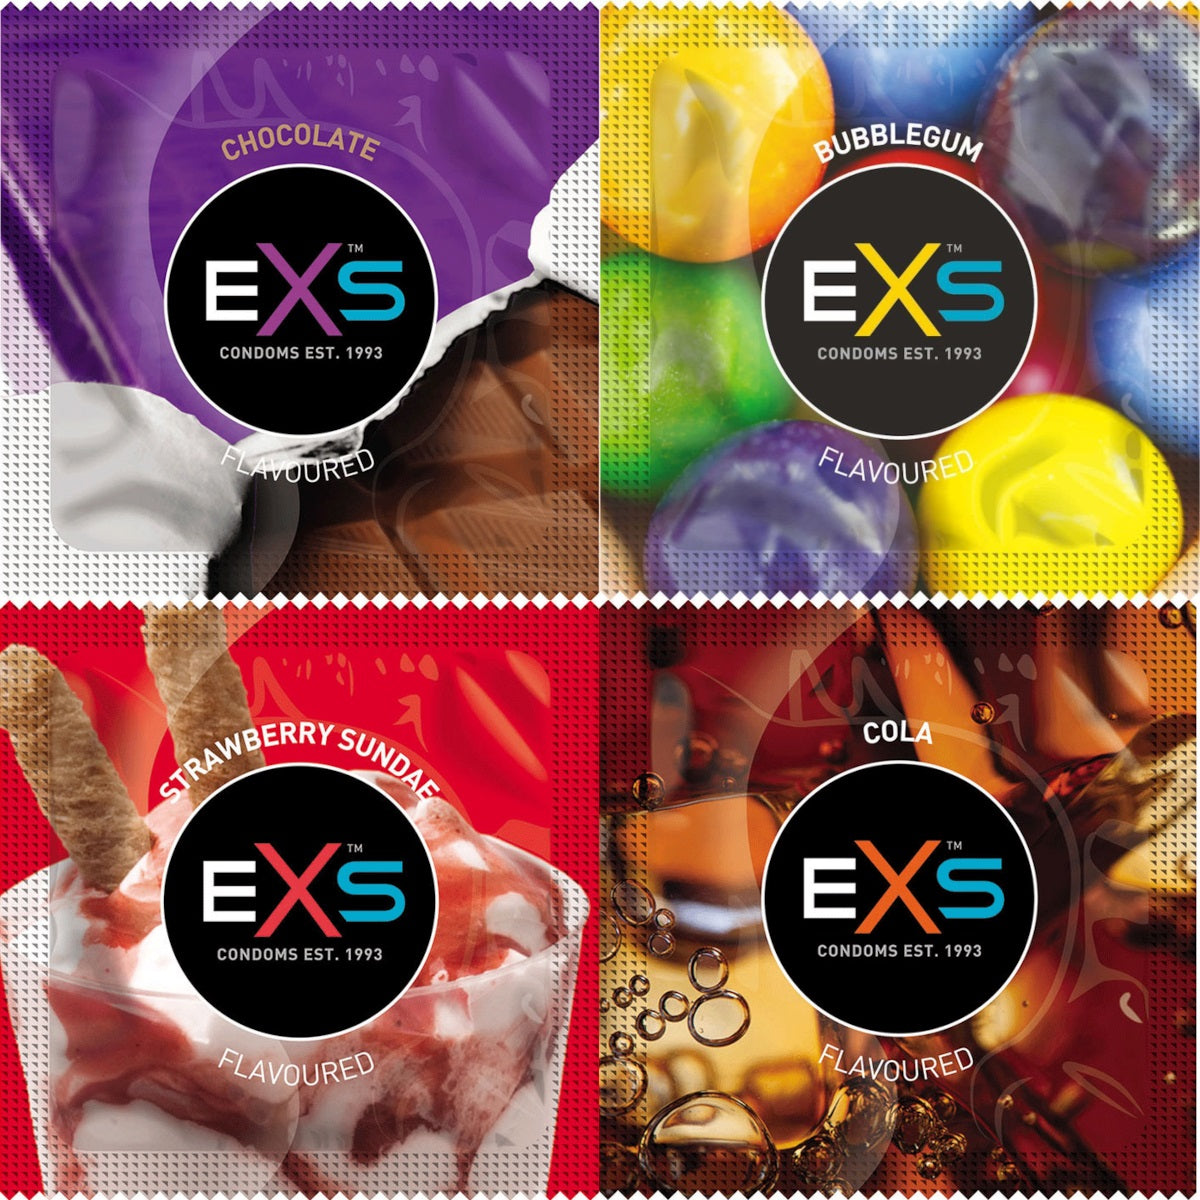 exs condoms mixed flavoured flavours image 